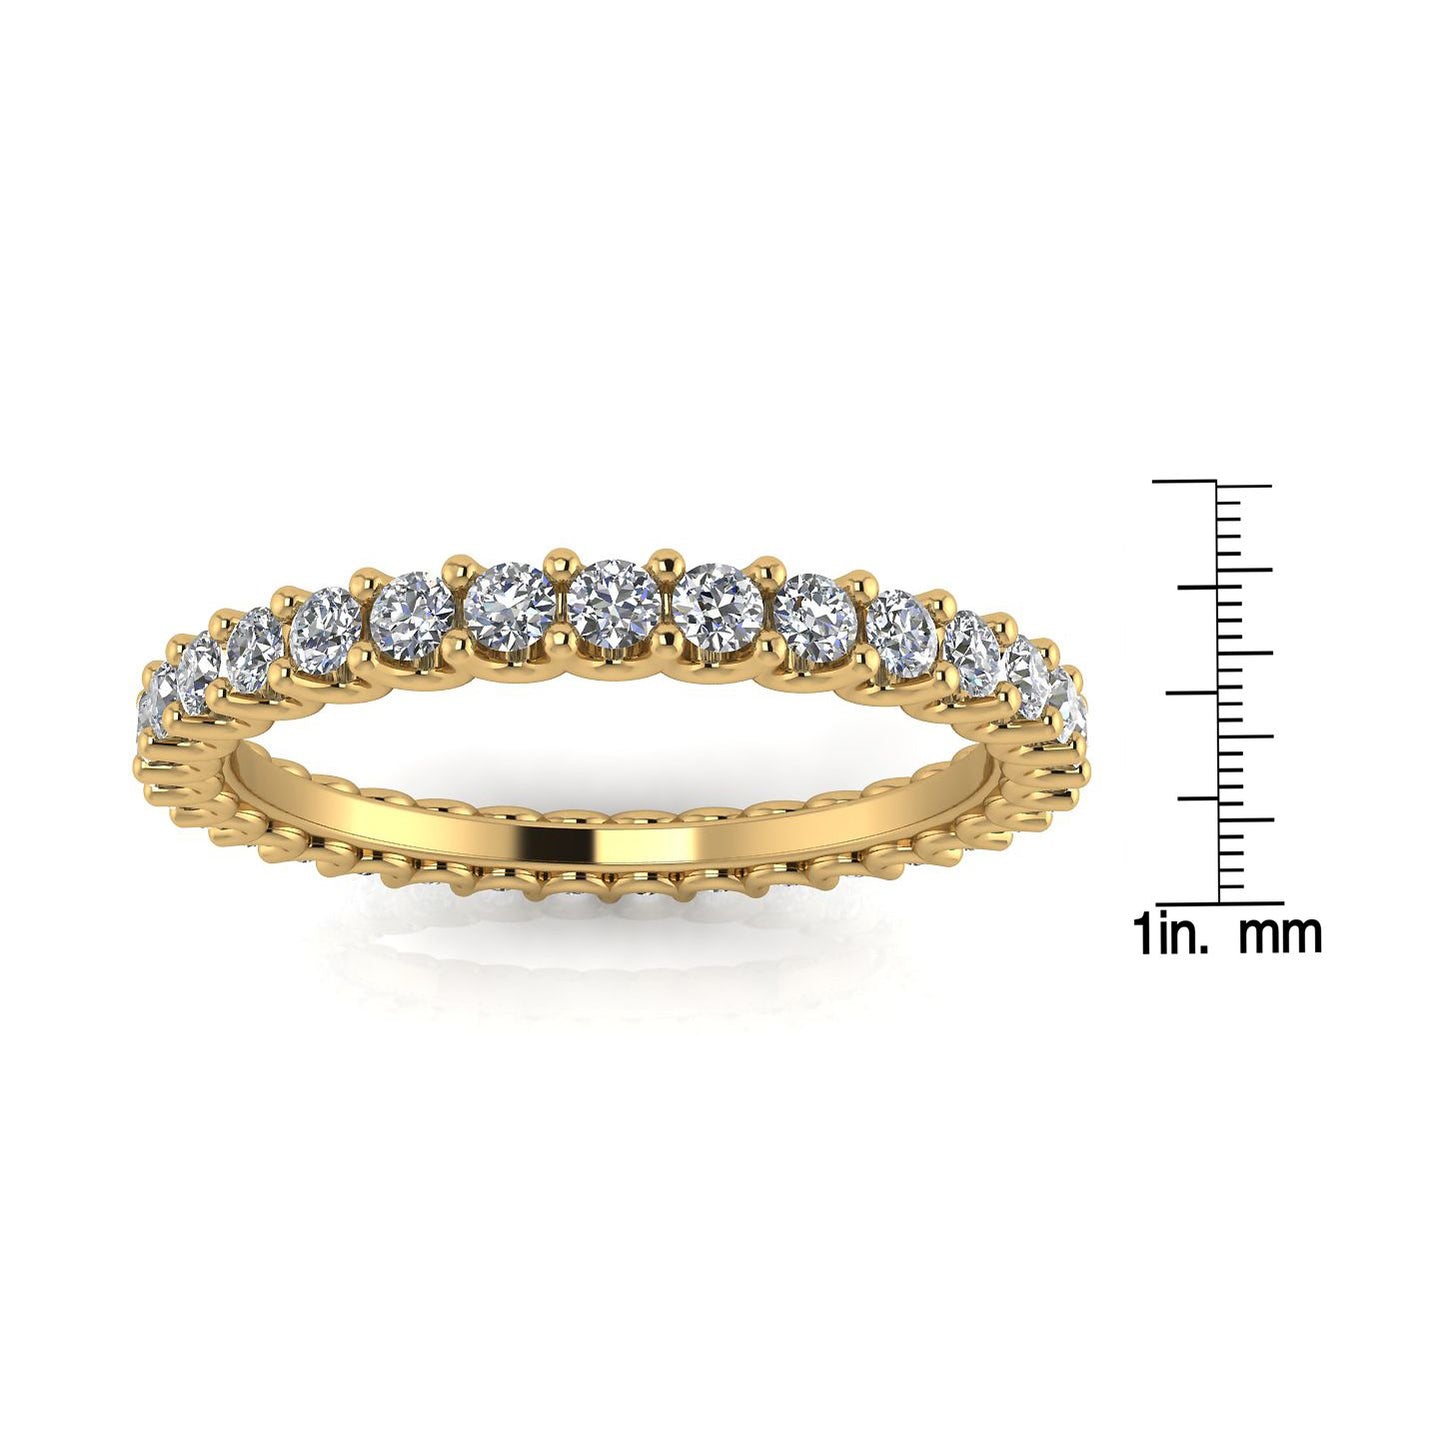 Round Brilliant Cut Diamond Shared Prong Set Eternity Ring In 14k Yellow Gold  (0.66ct. Tw.) Ring Size 5